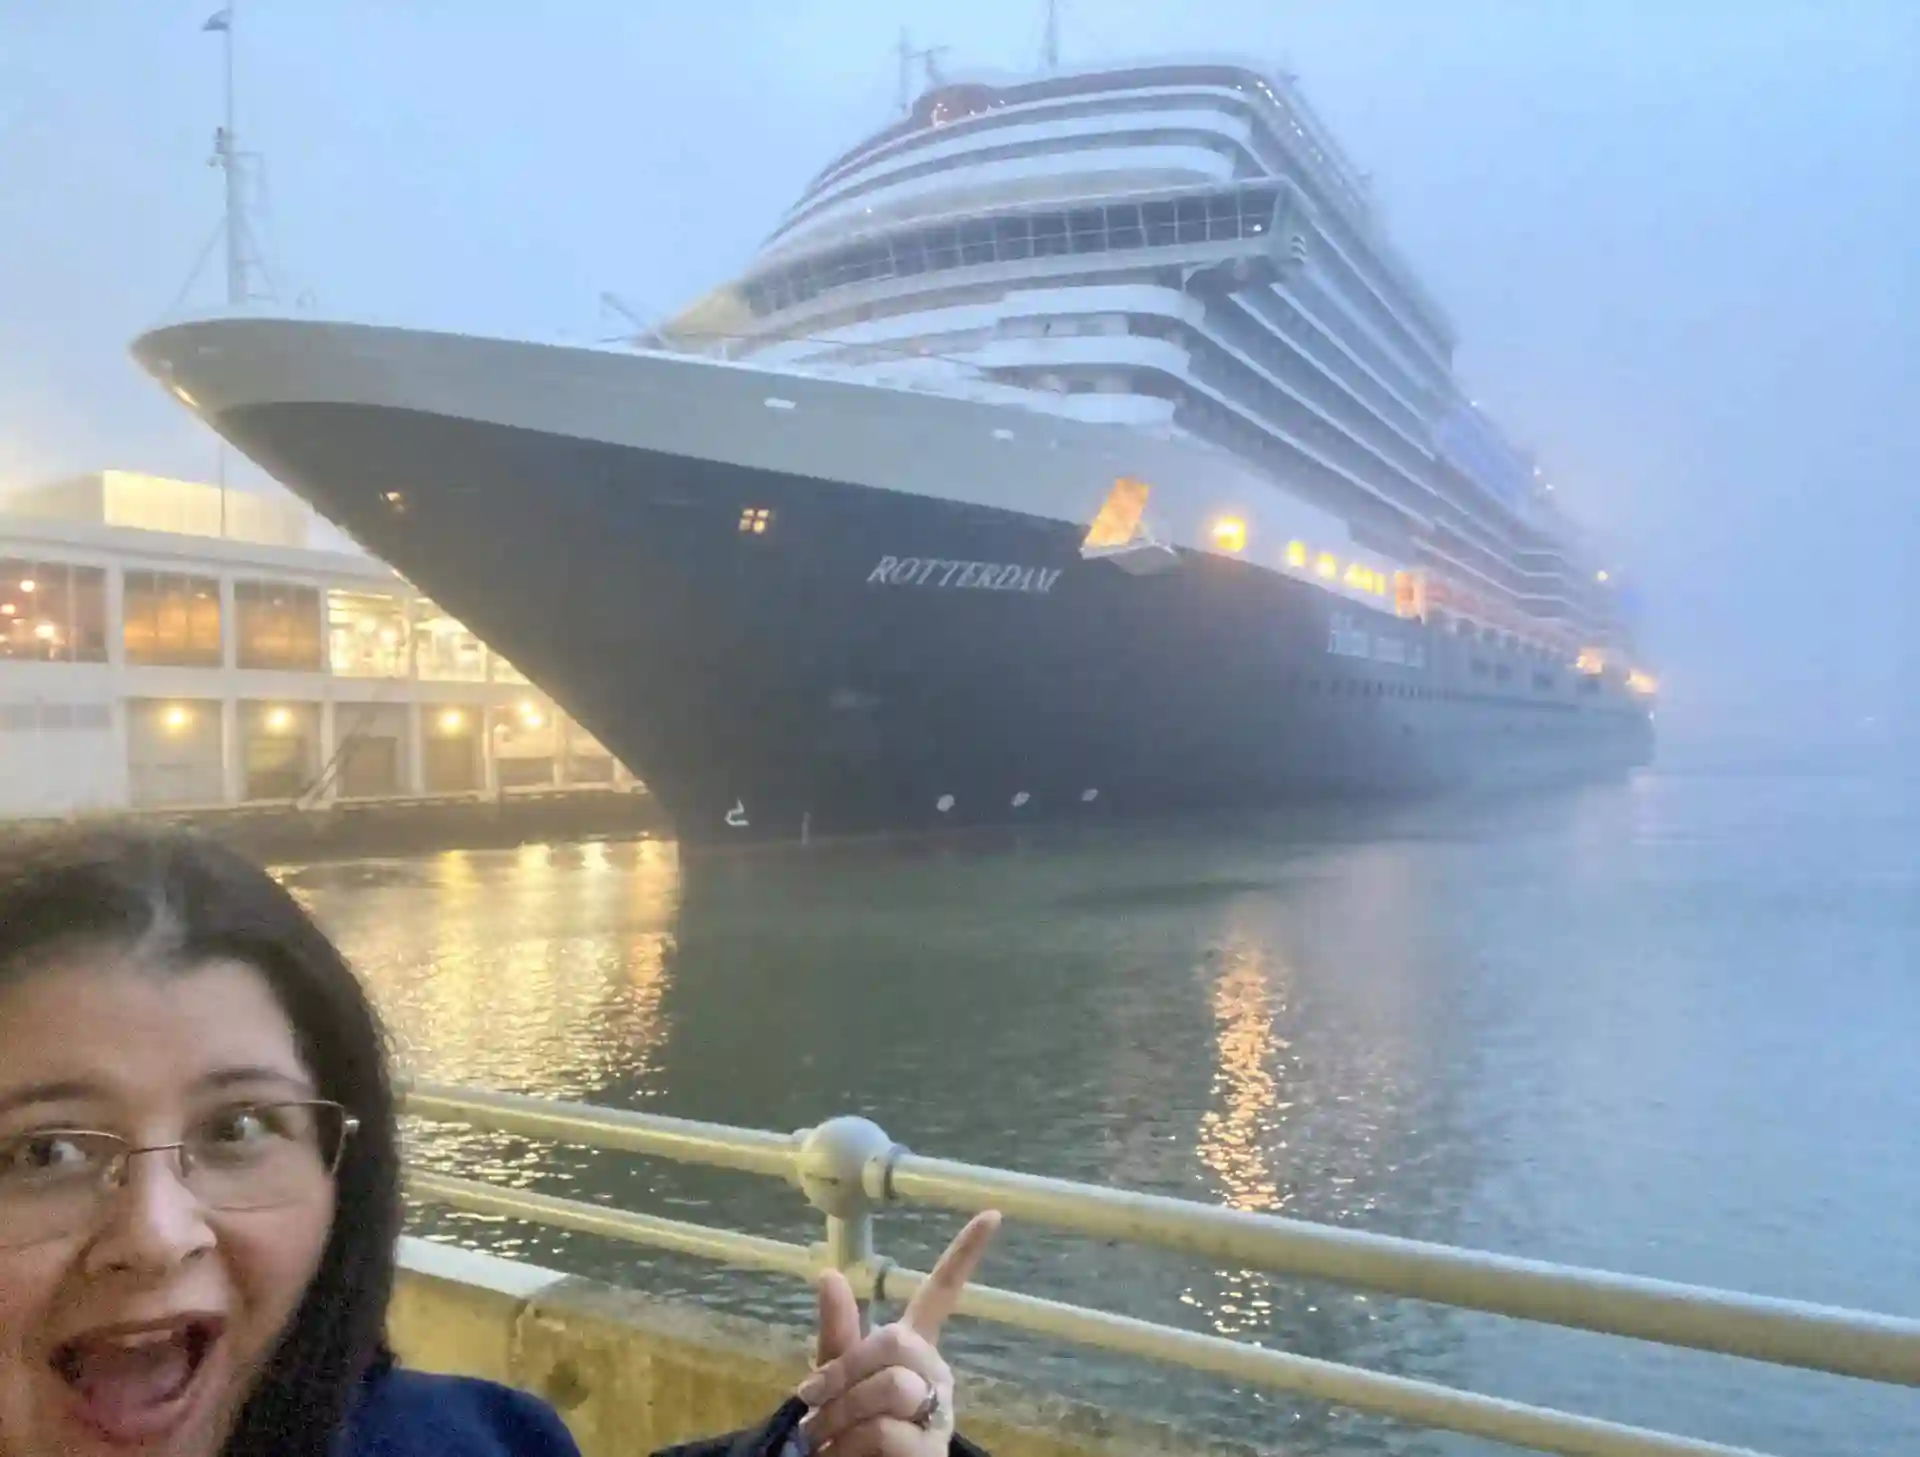 View of person showing excitement, pointing at Holland America Line cruise ship in port.